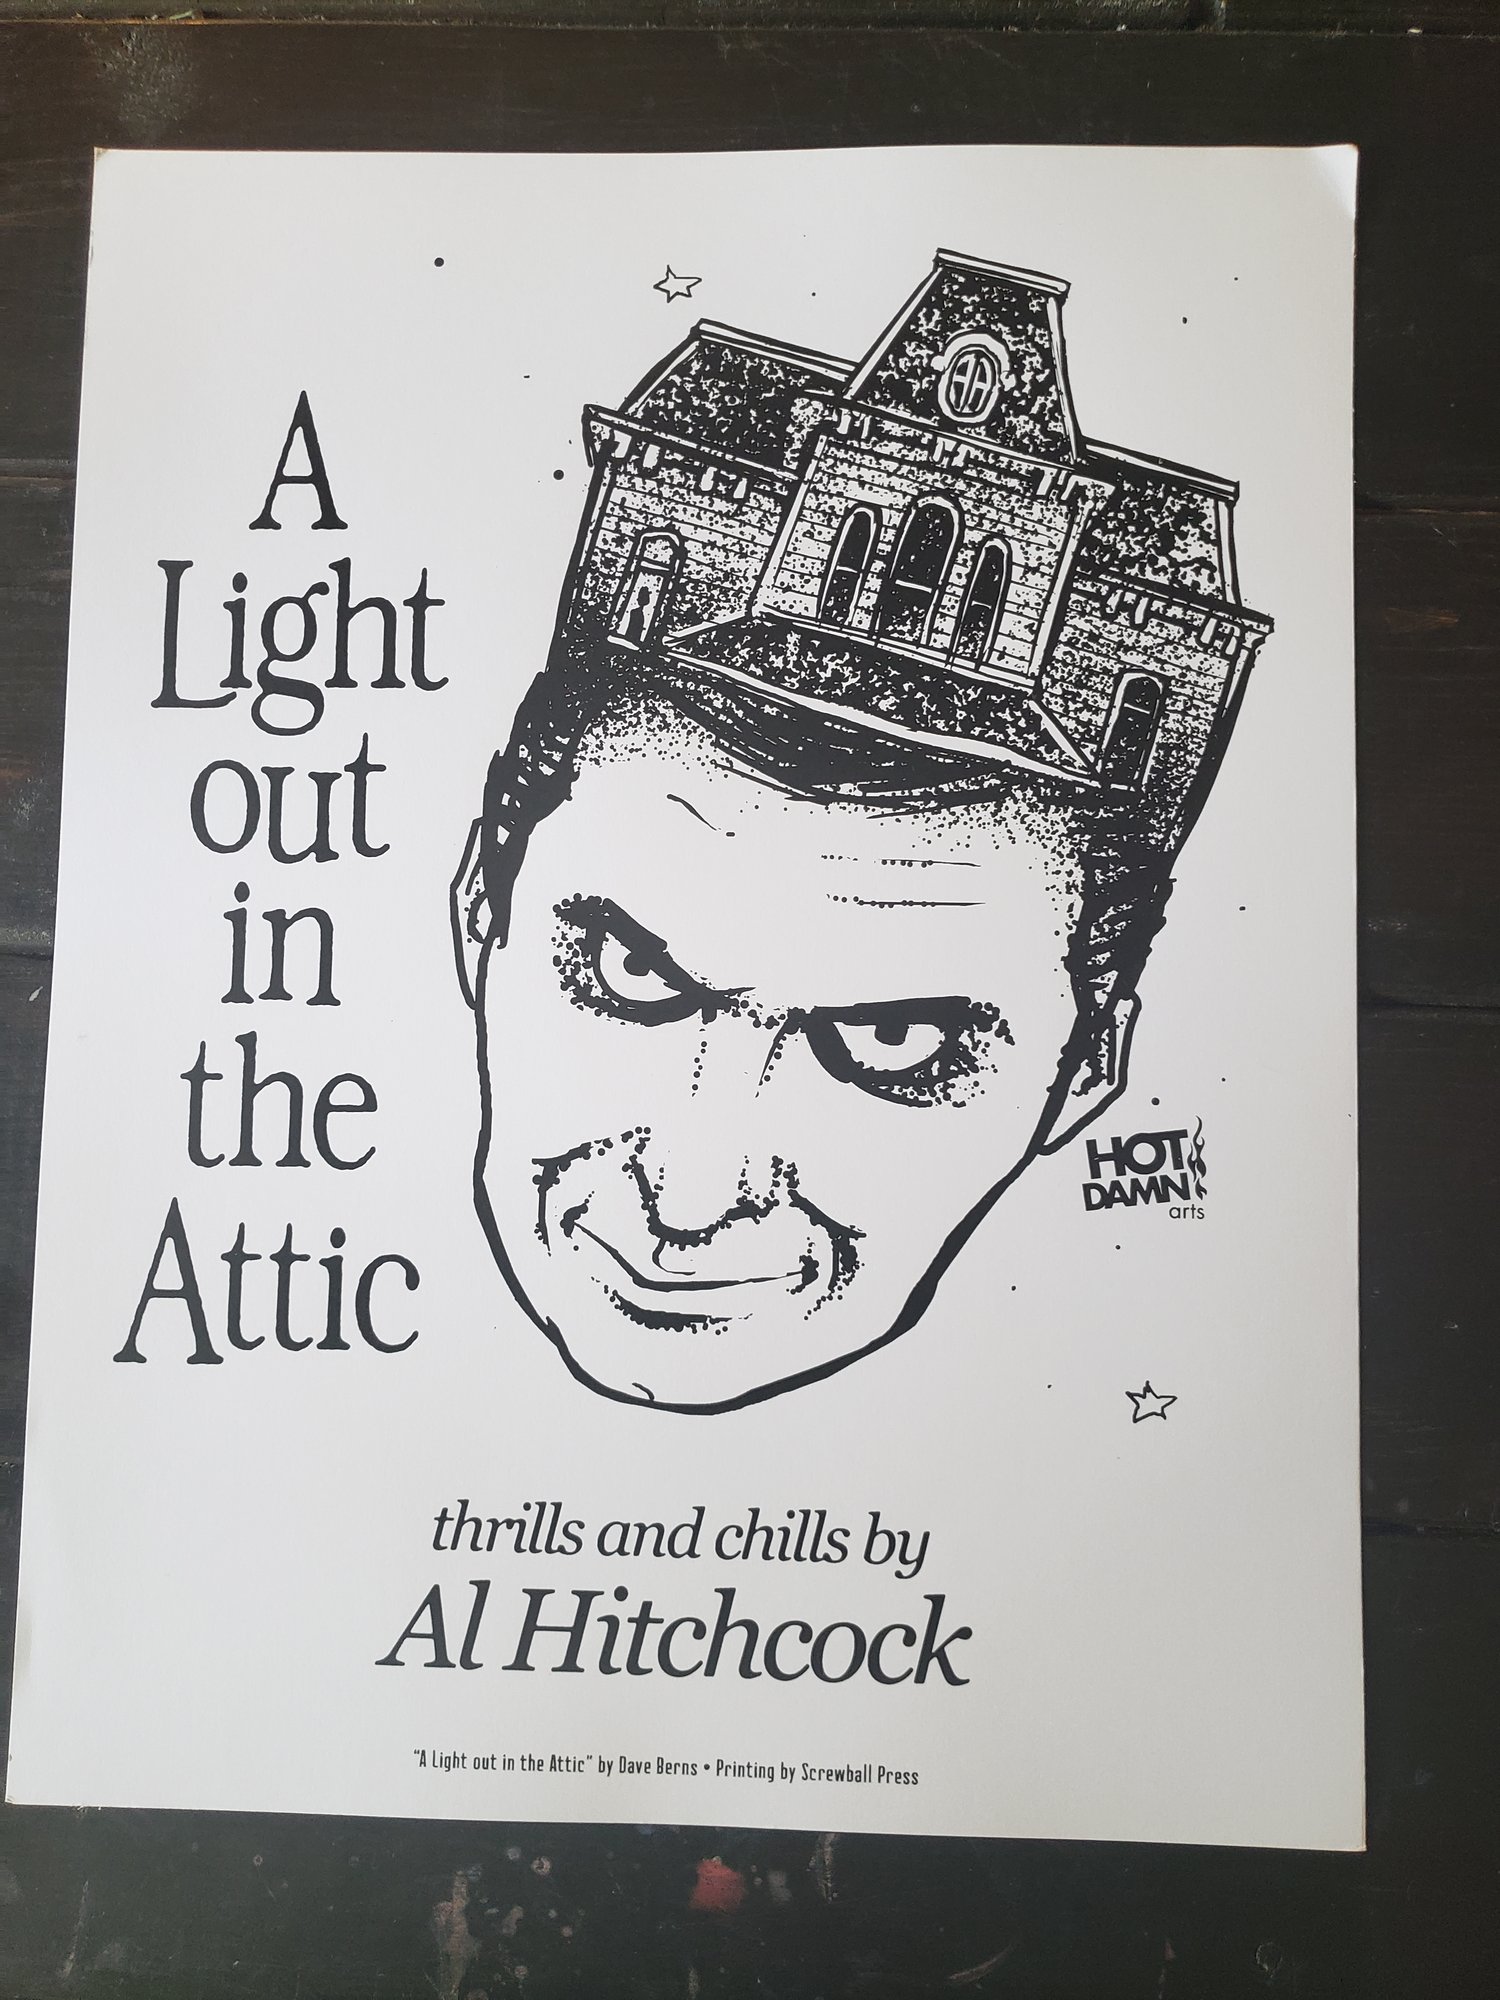 There's a Light Out in the Attic Silkscreen Art Print